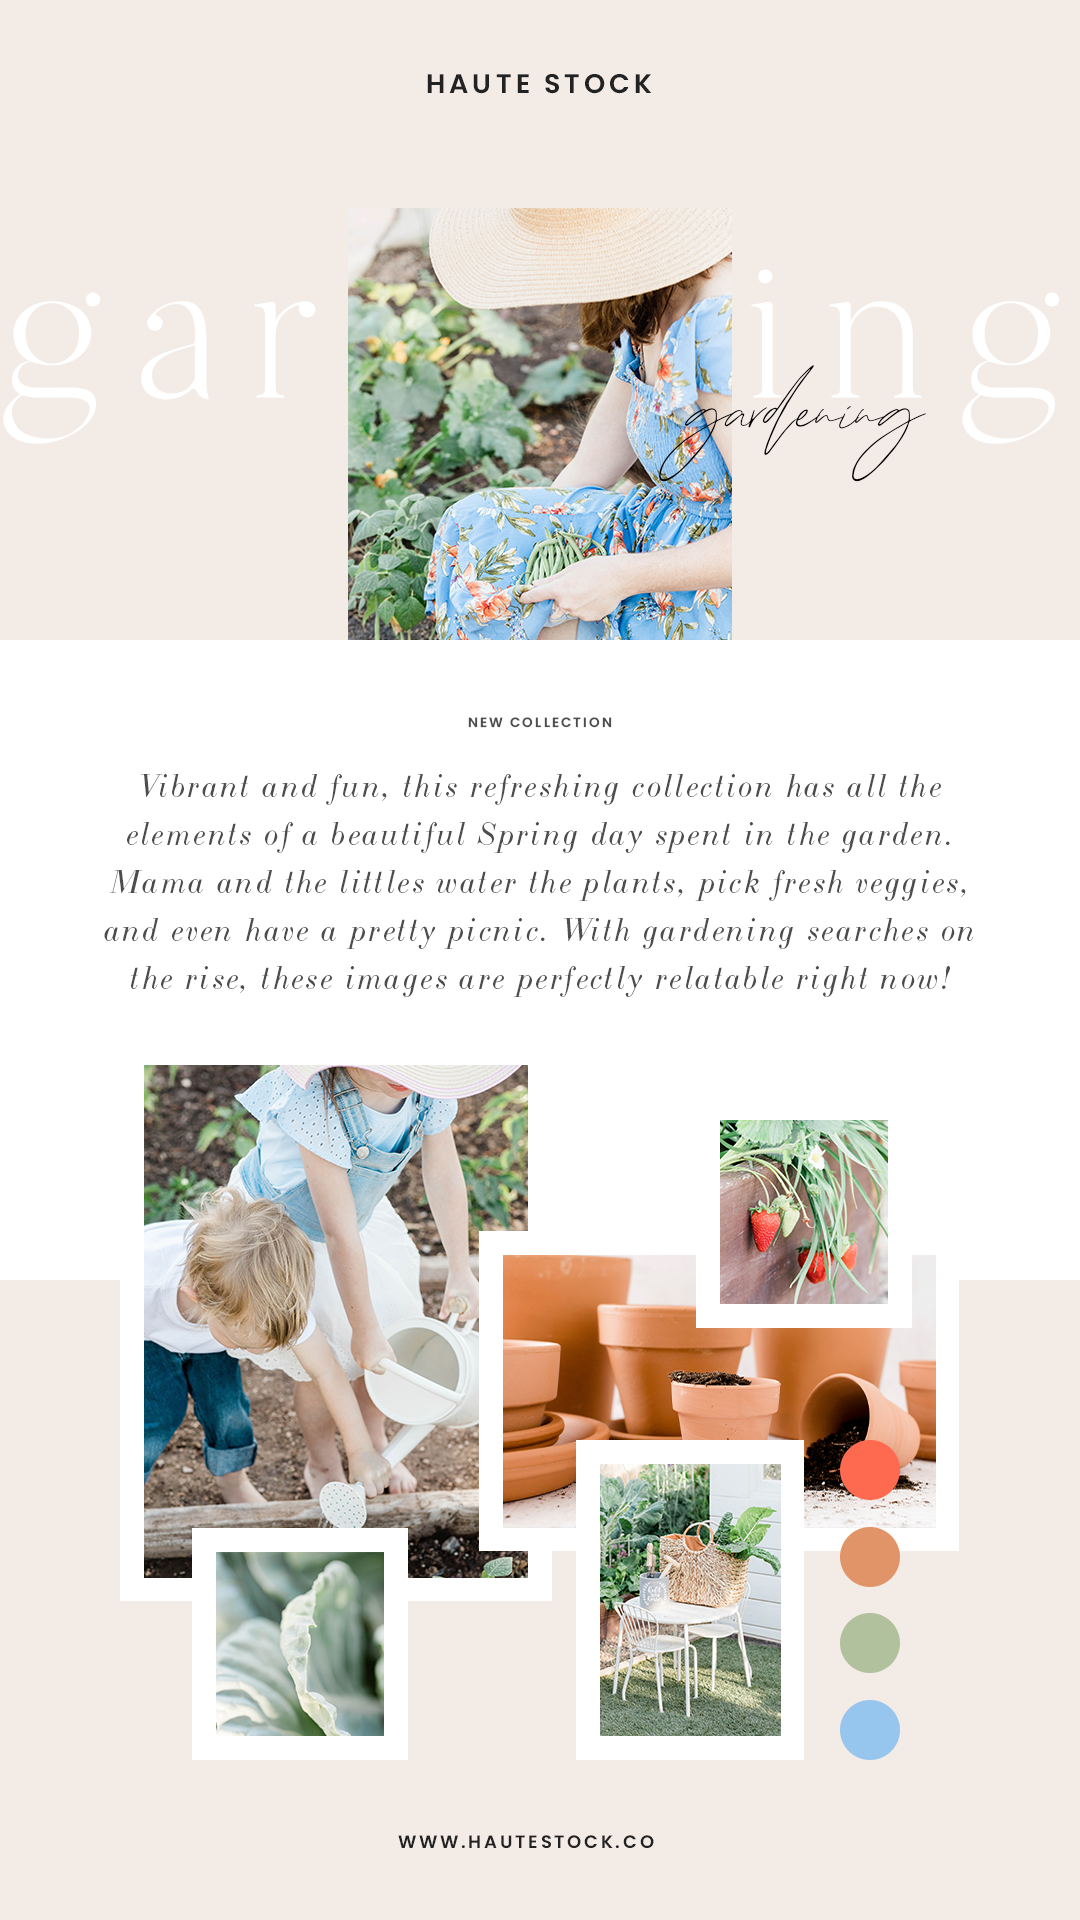 Family gardening styled stock photos from Haute Stock. Images for your posts on how to start a backyard garden, how to grow plants, gardening for beginners and so much more! Use them on social media, boost posts, to create Pinterest graphics, on you…